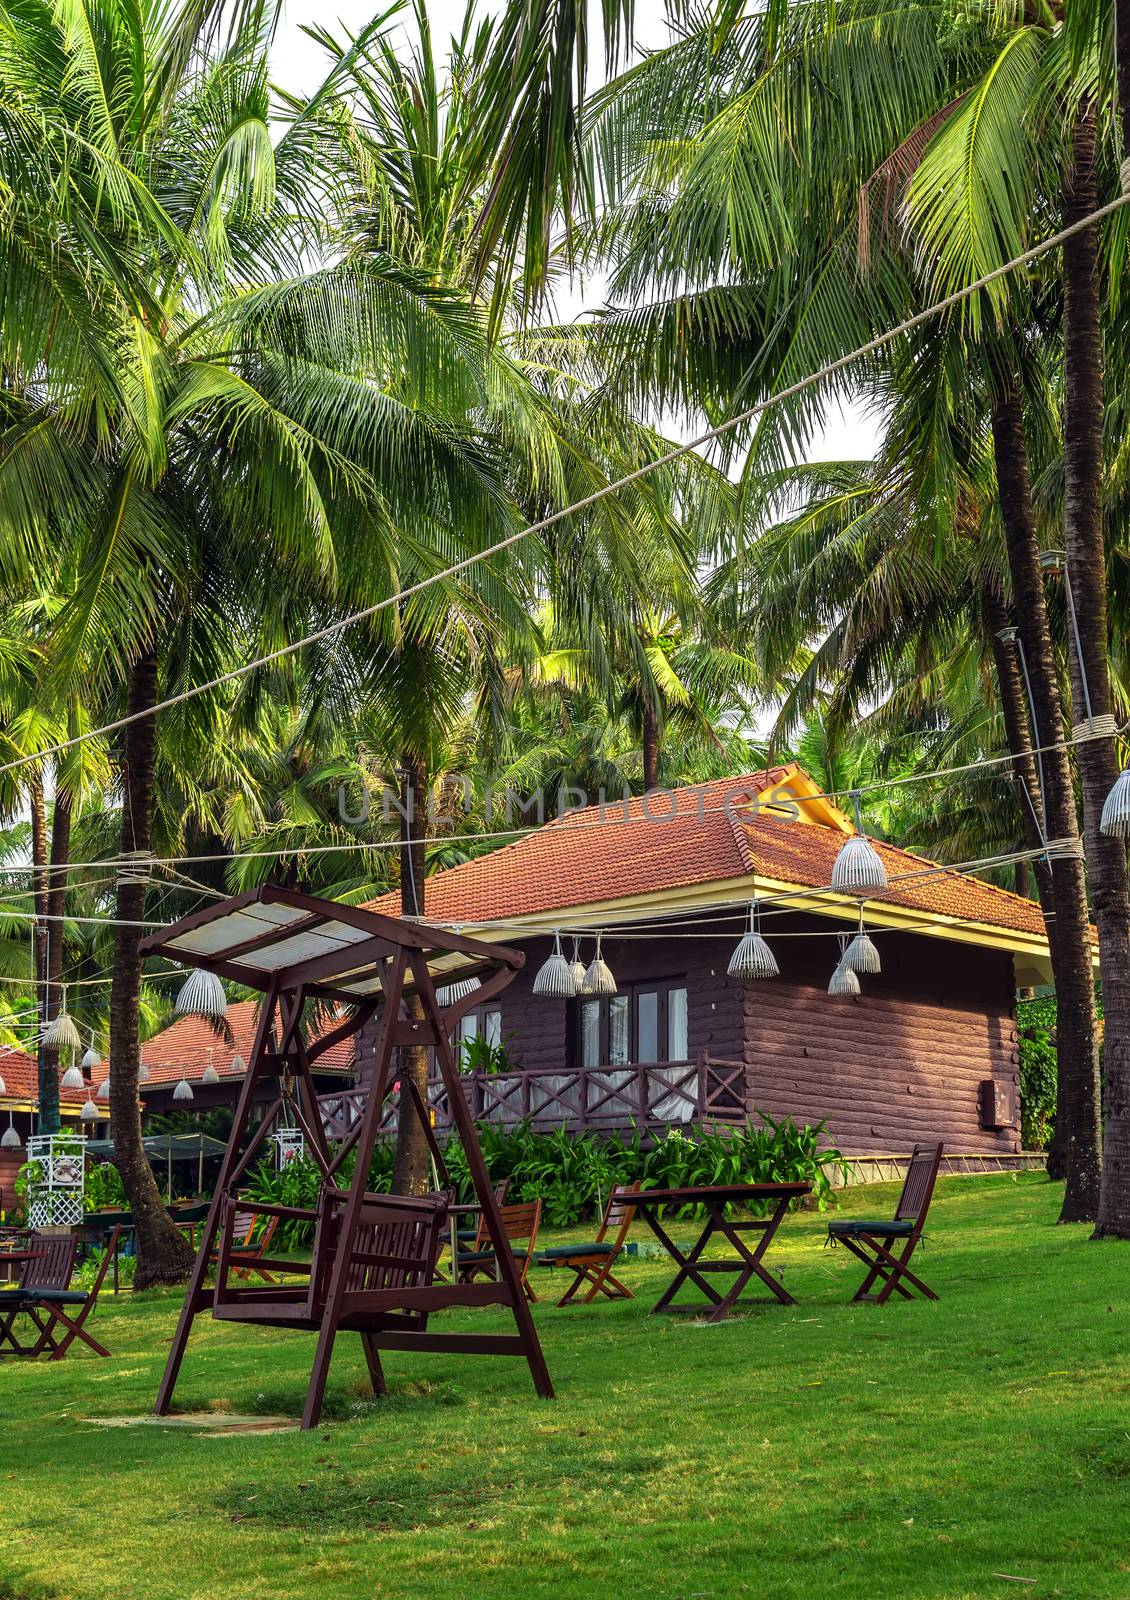 Tropical beach resort with bamboo hut and coconut trees